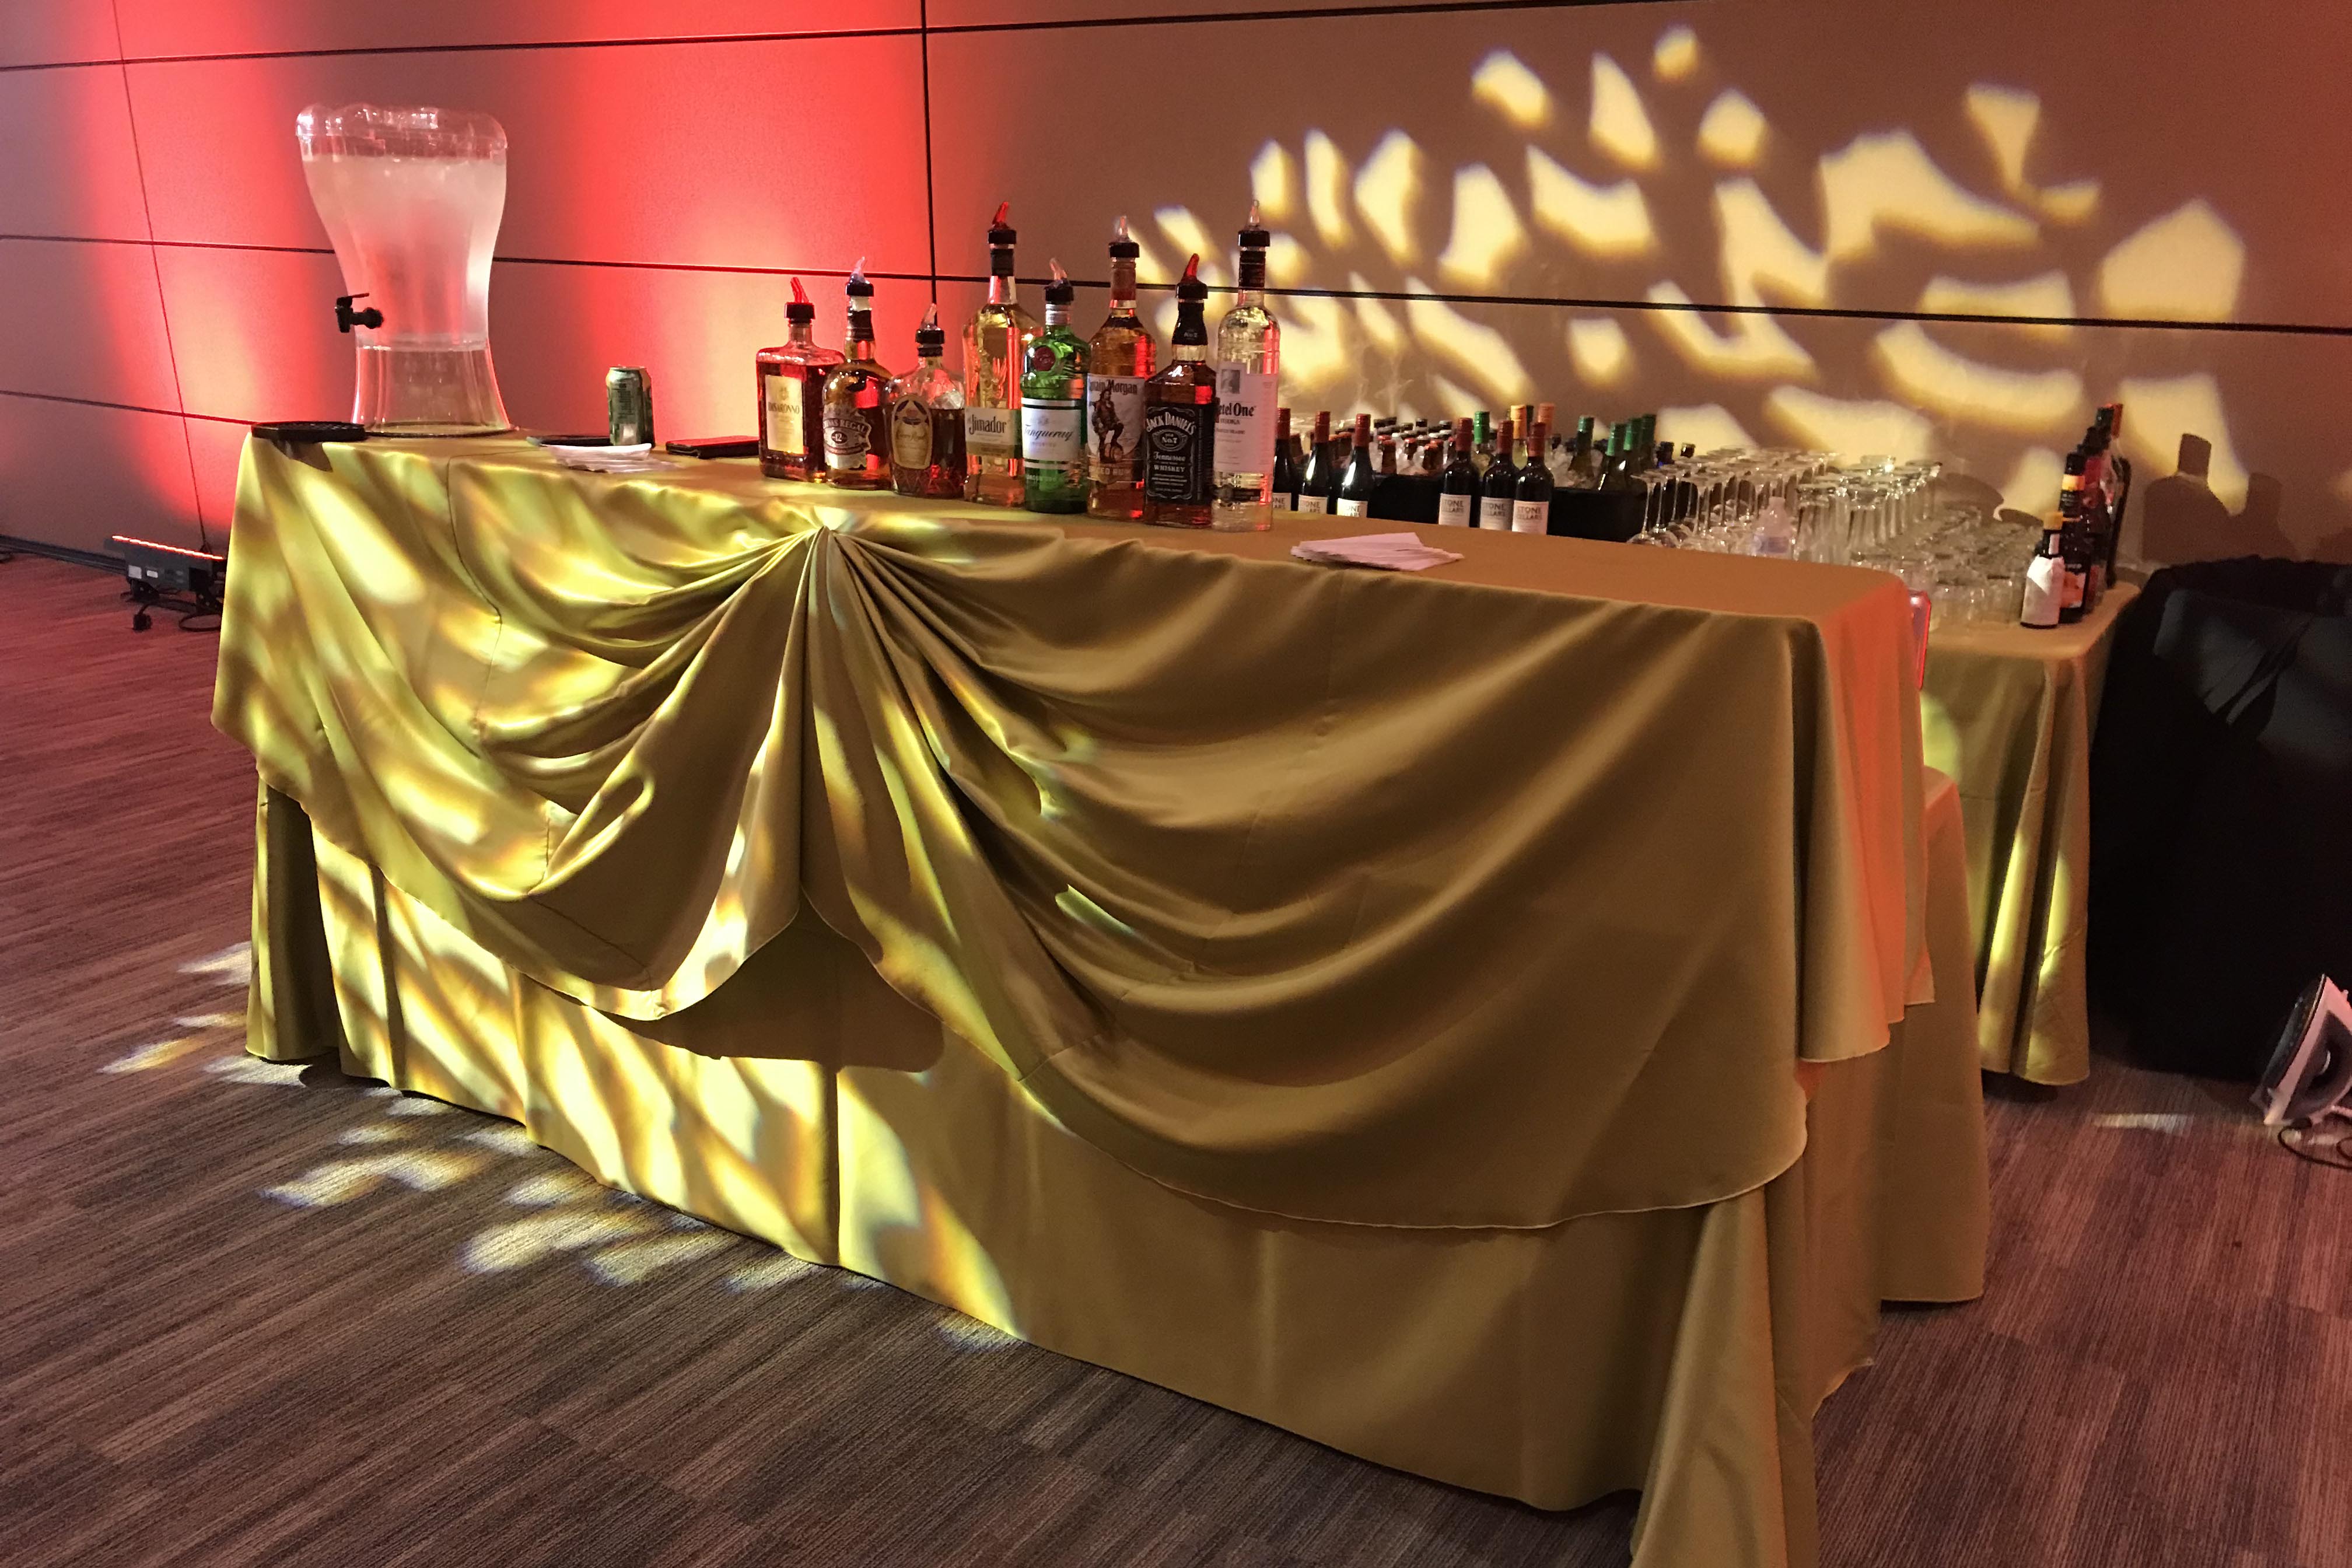 A view of a bar set-up for a reception.